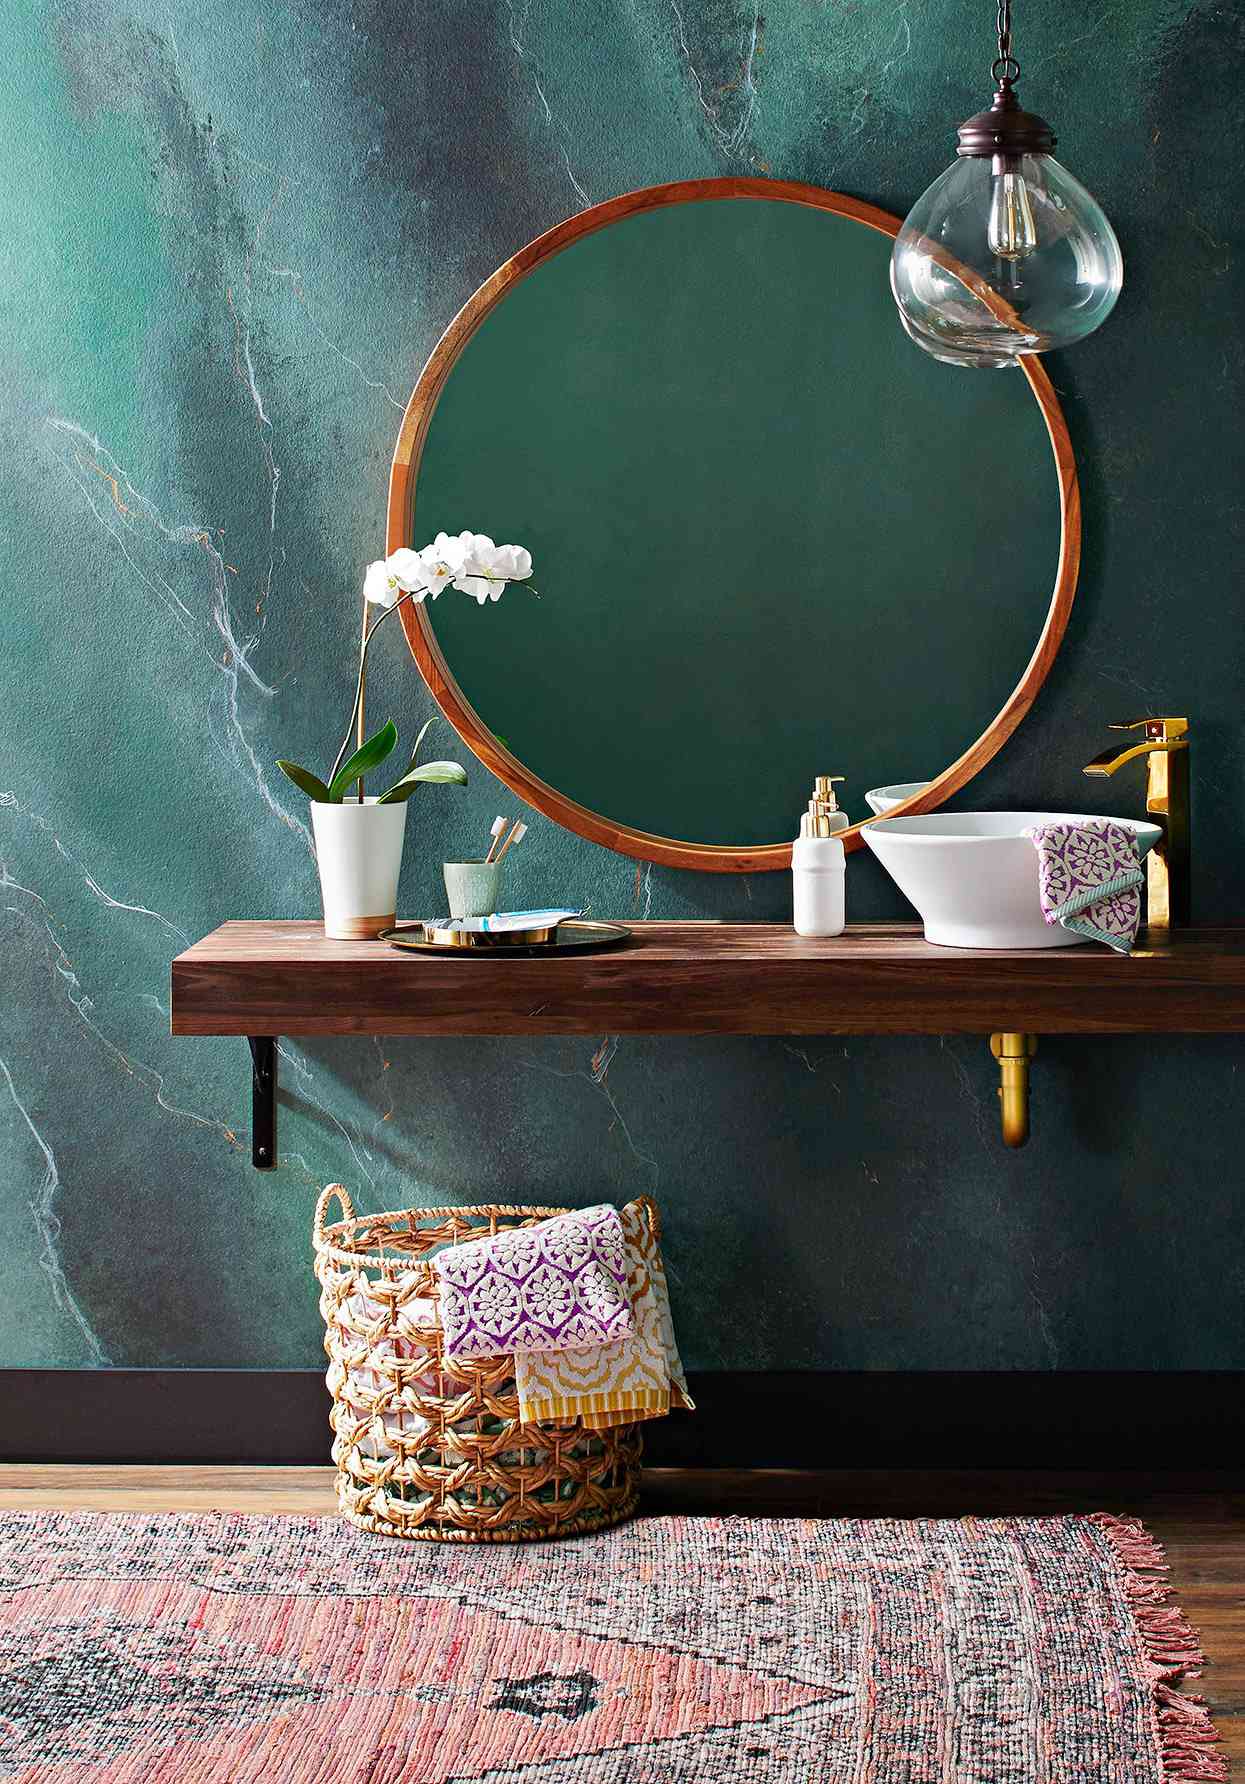 bohemian-style bathroom vanity with green marbled wall effect